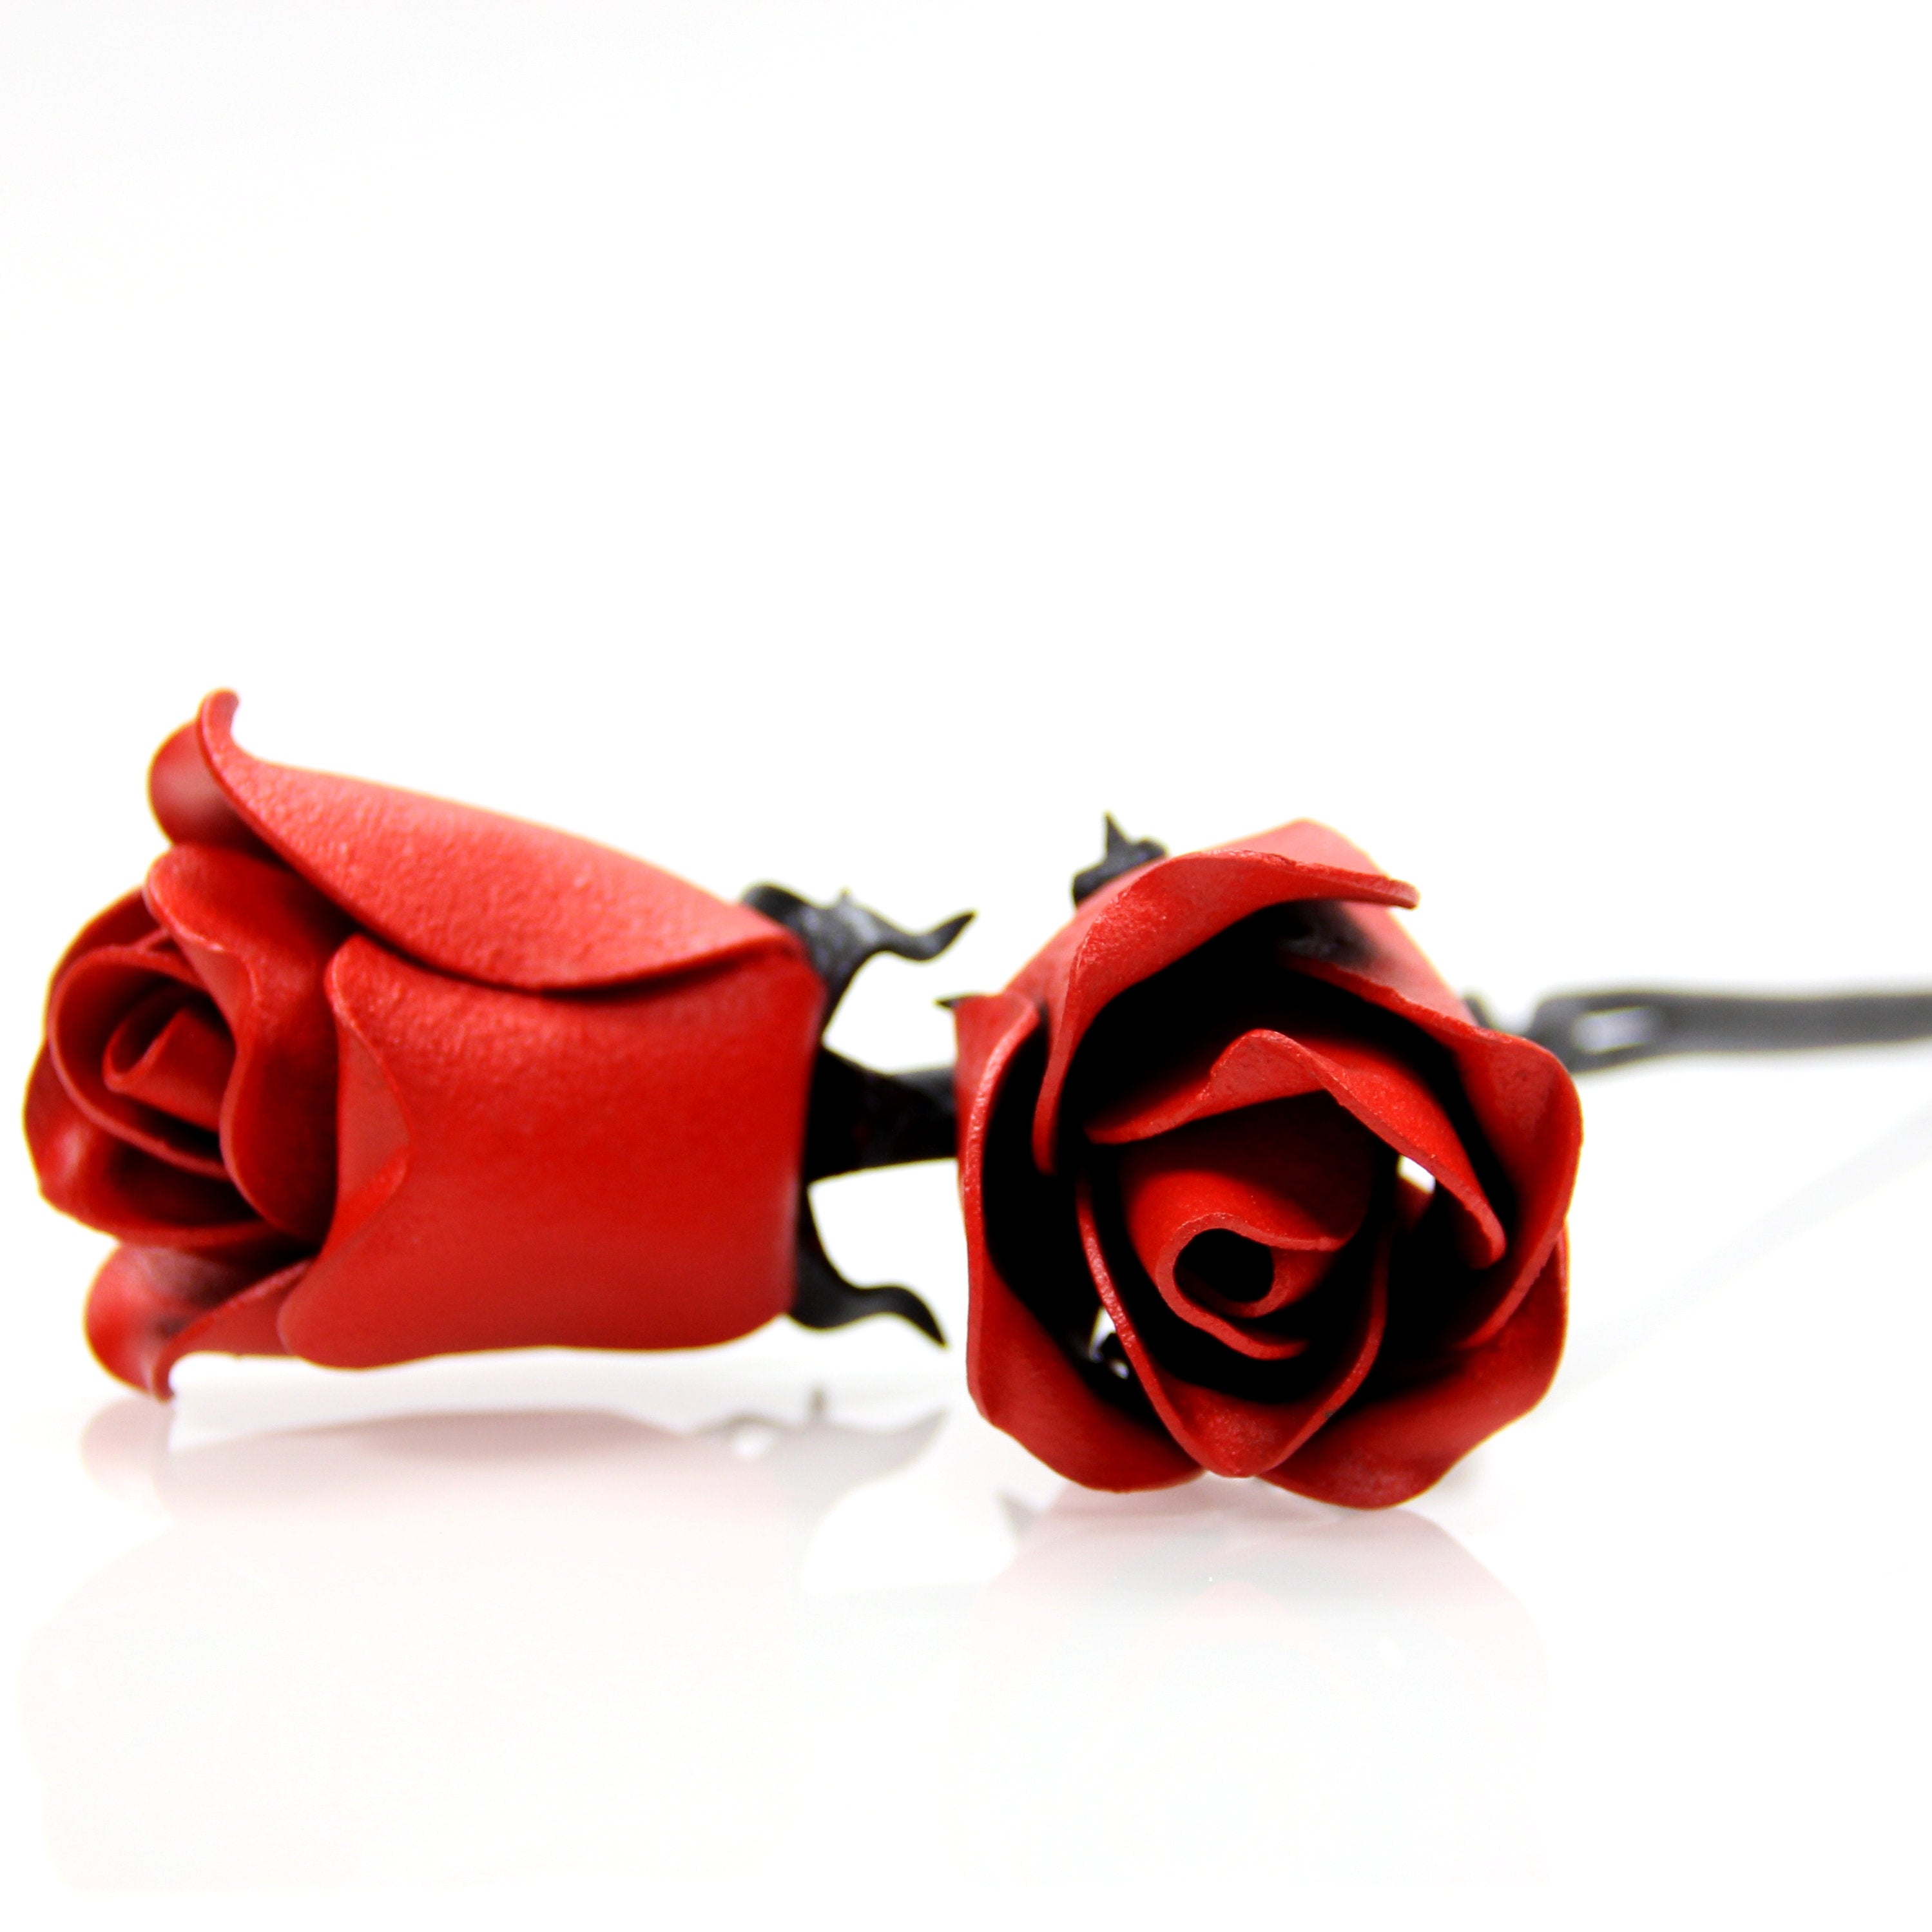 Bouquet of 2 Black Iron Roses With Red Petals Twisted Together Forever